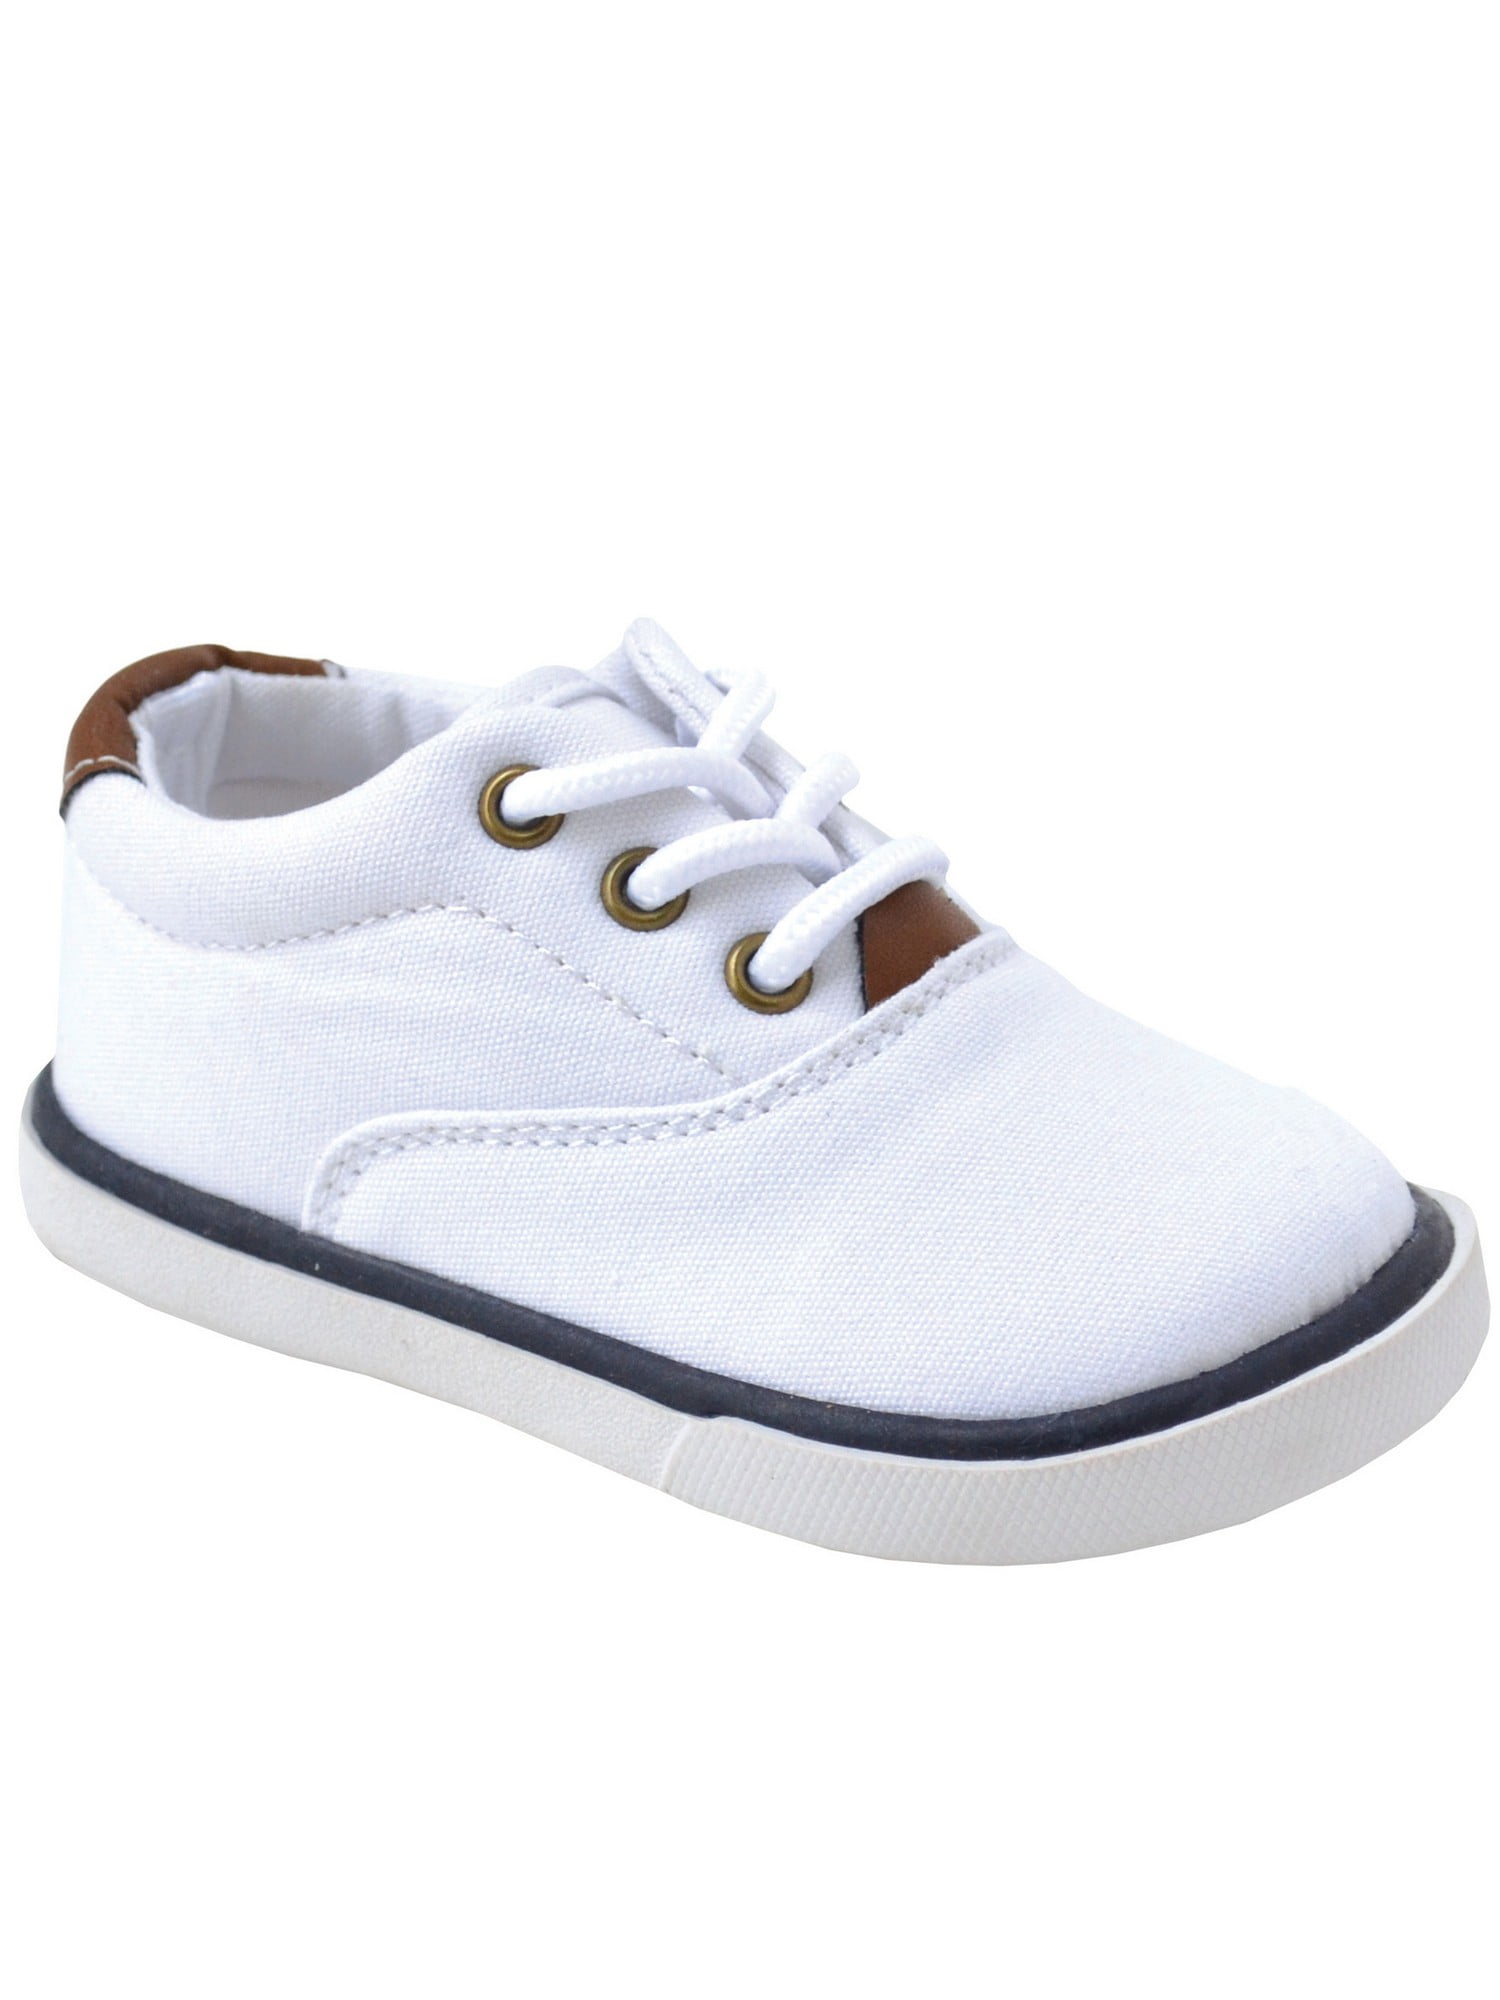 white canvas baby shoes